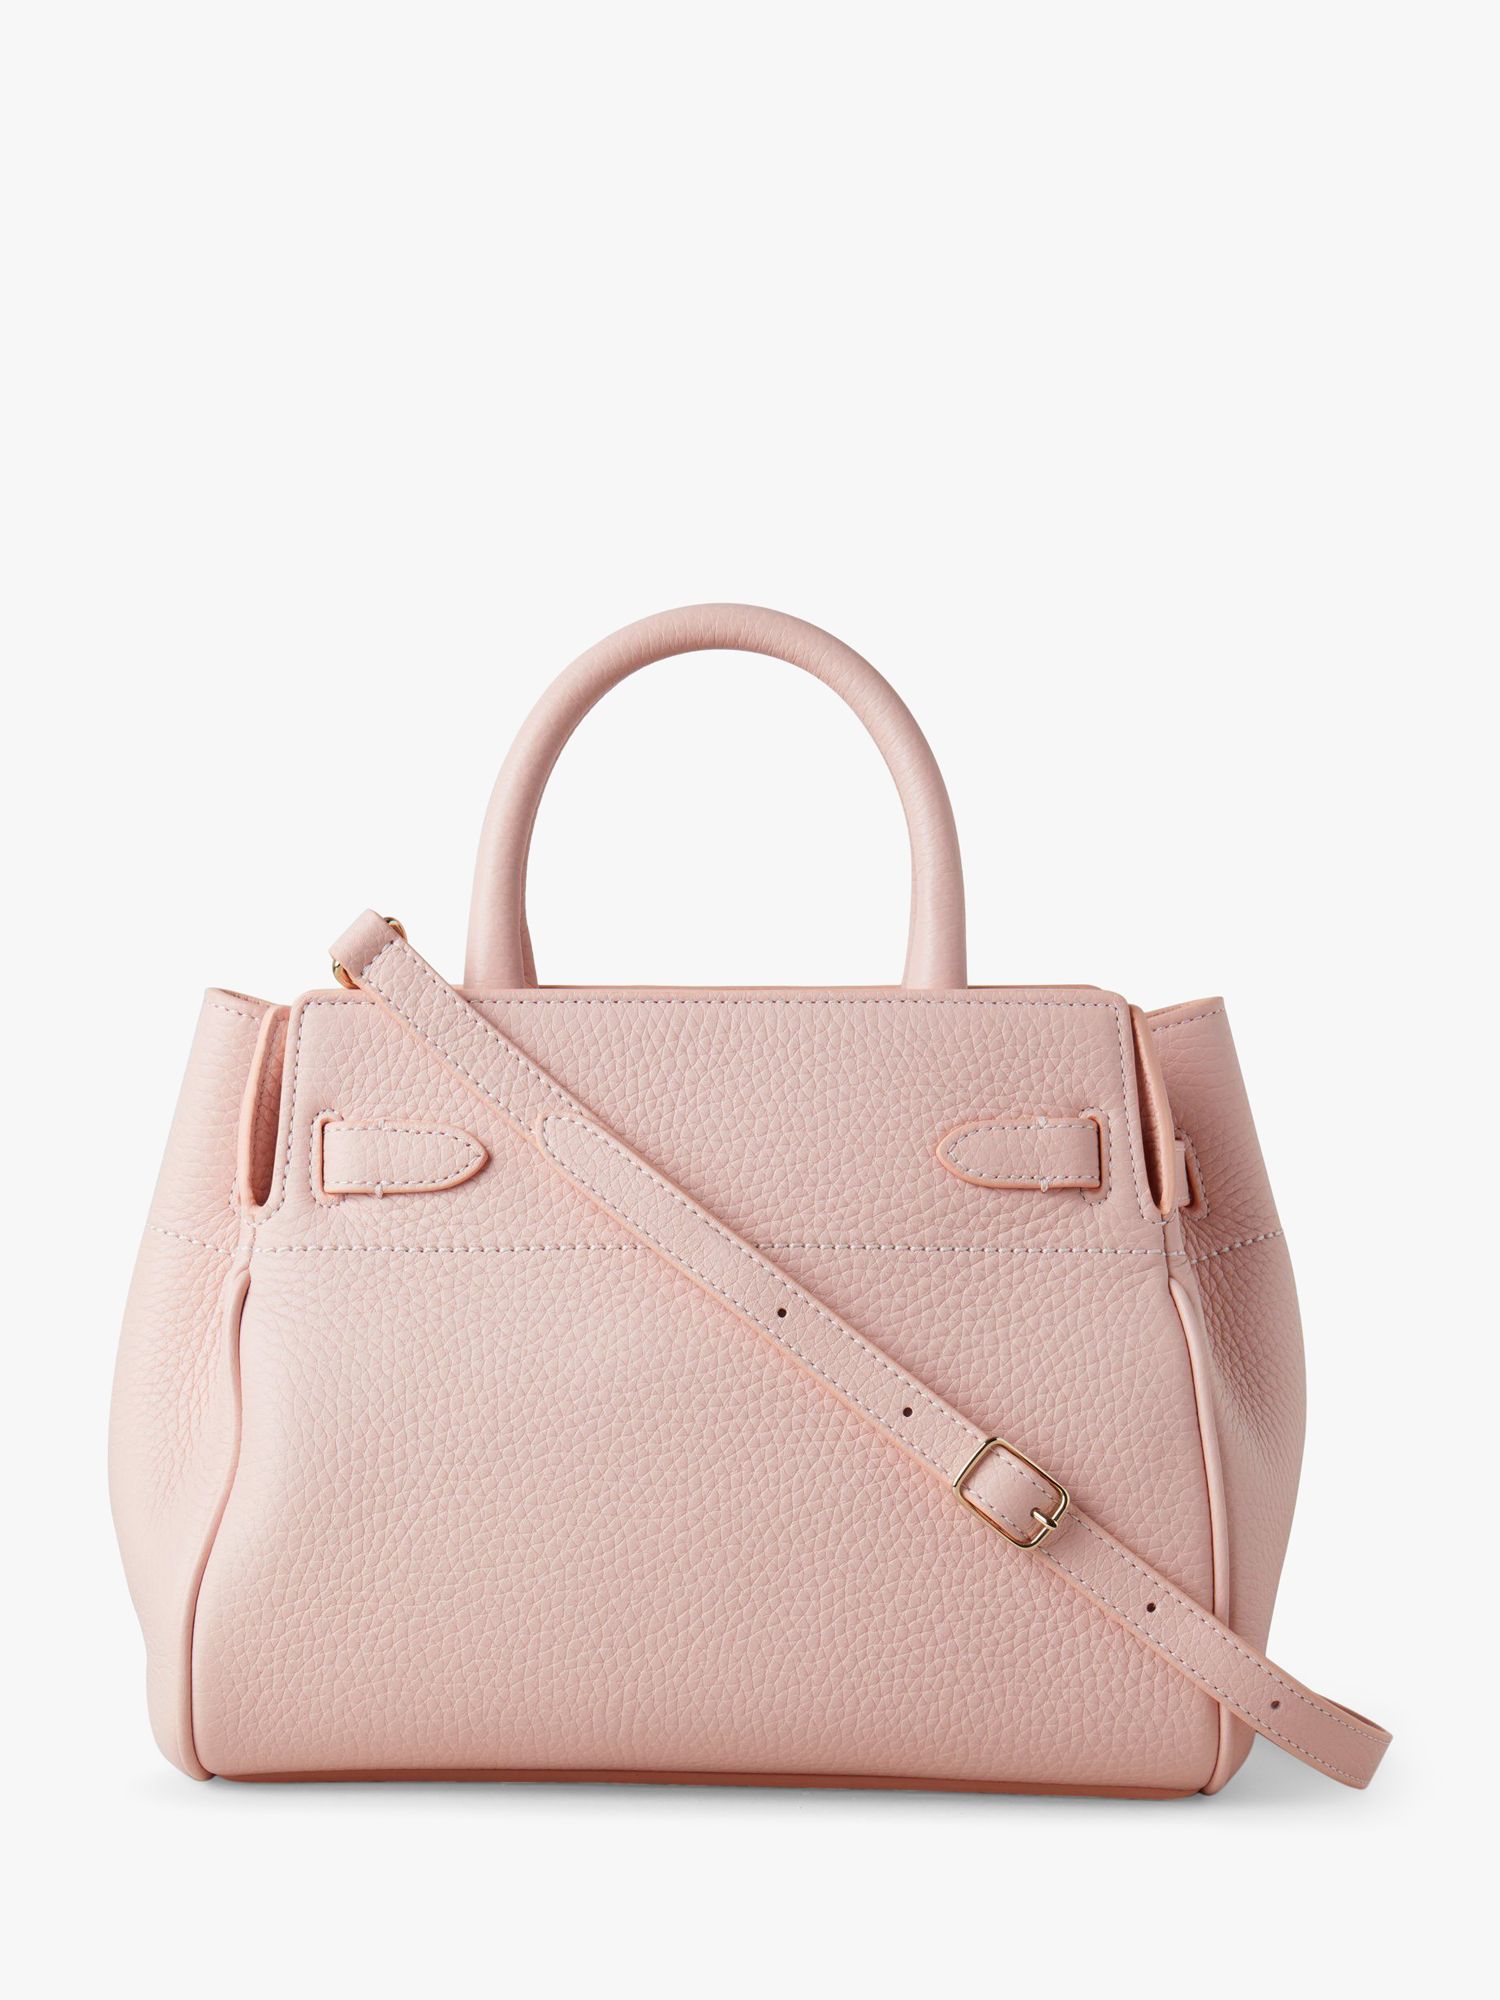 Mulberry Small Belted Bayswater Heavy Grain Leather Handbag, Icy Pink ...